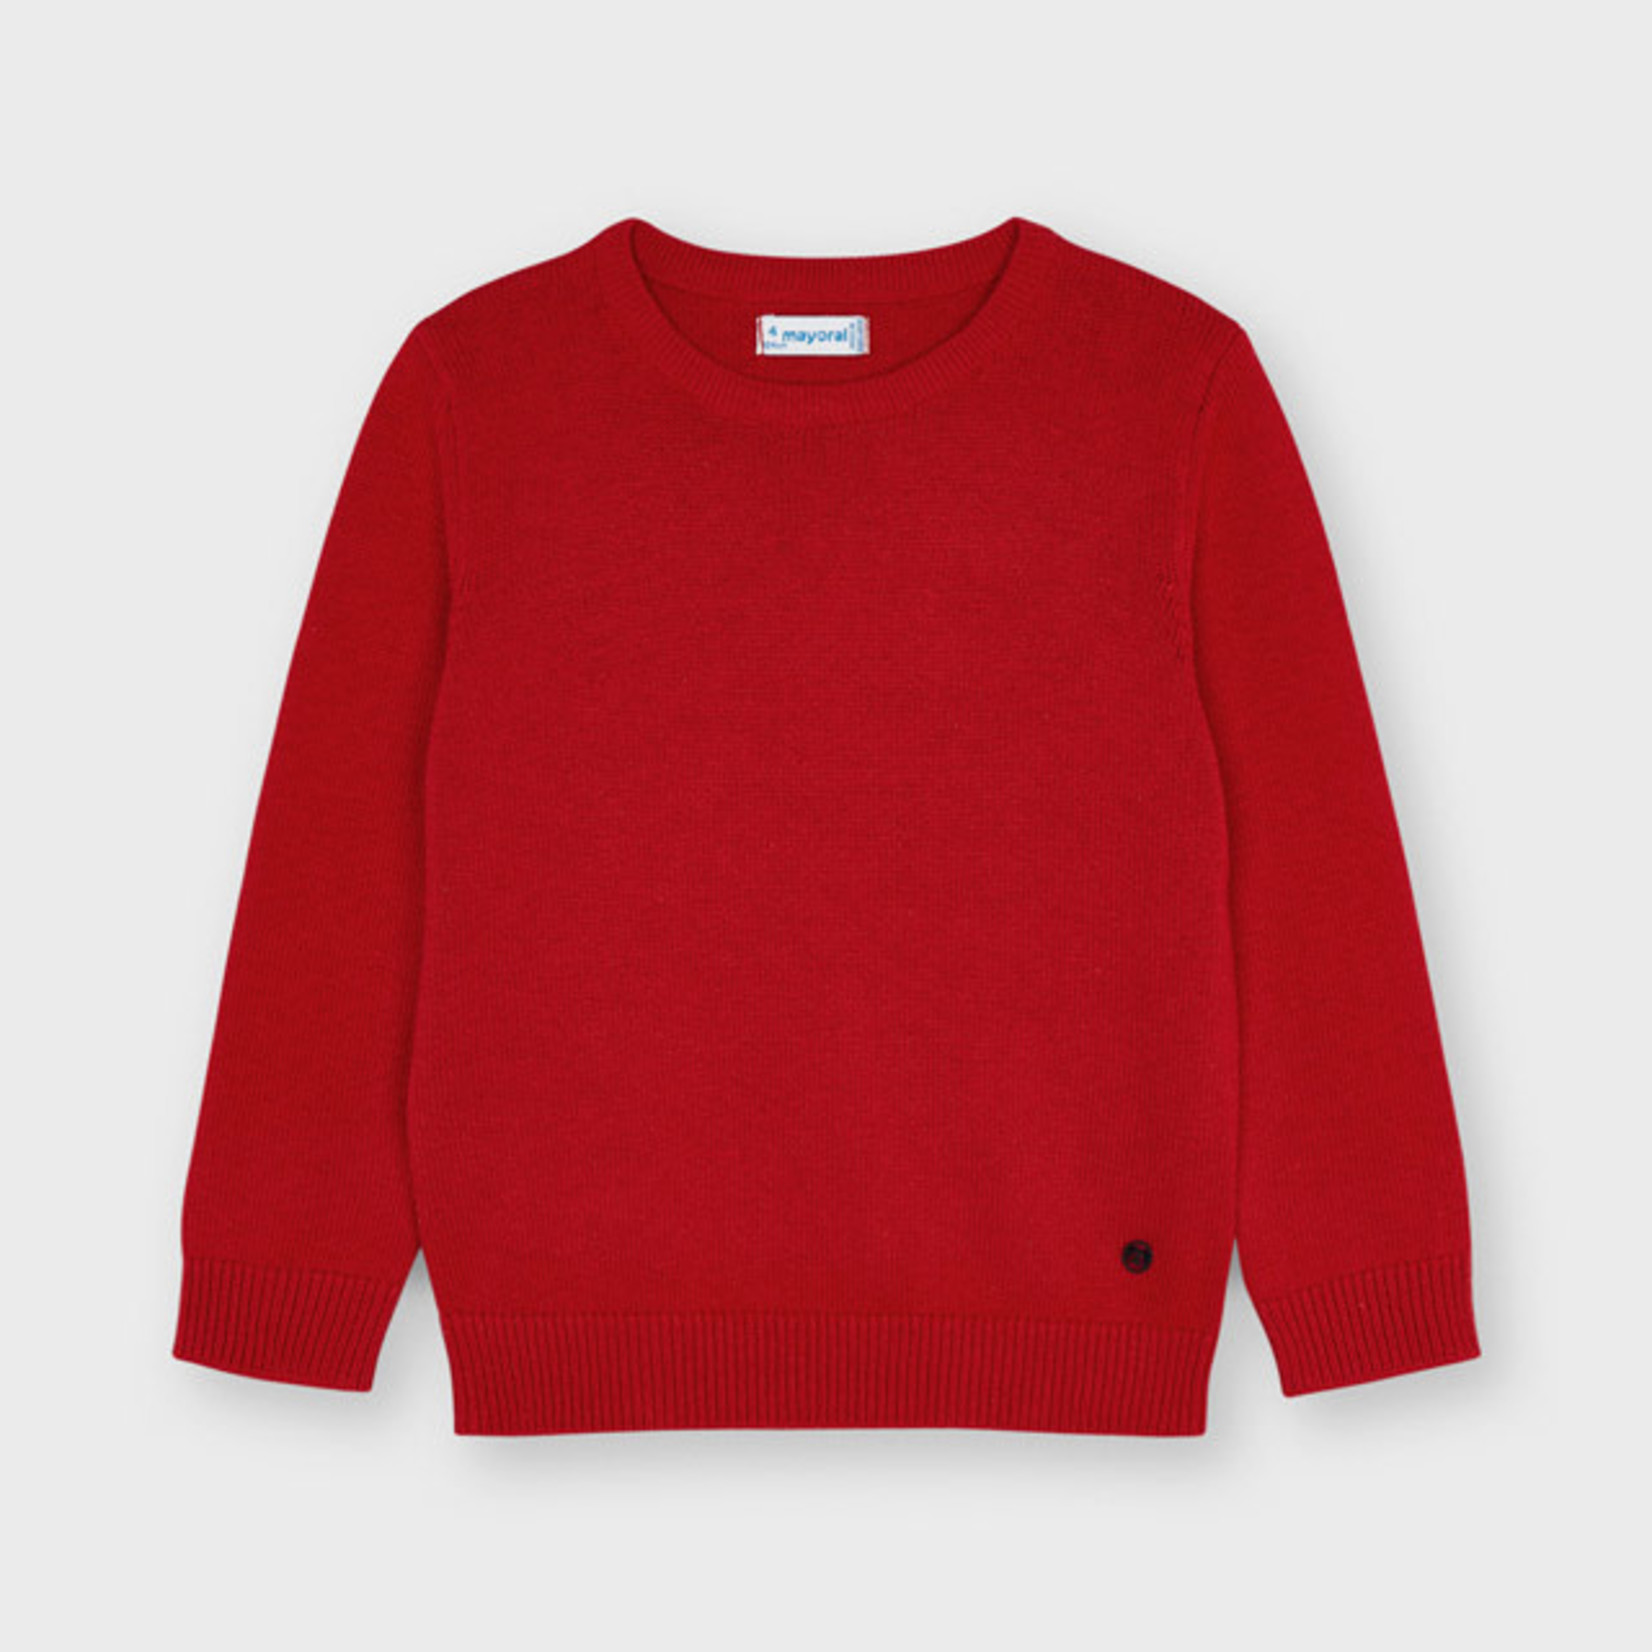 Mayoral Basic Crew Neck Sweater, Red Mix